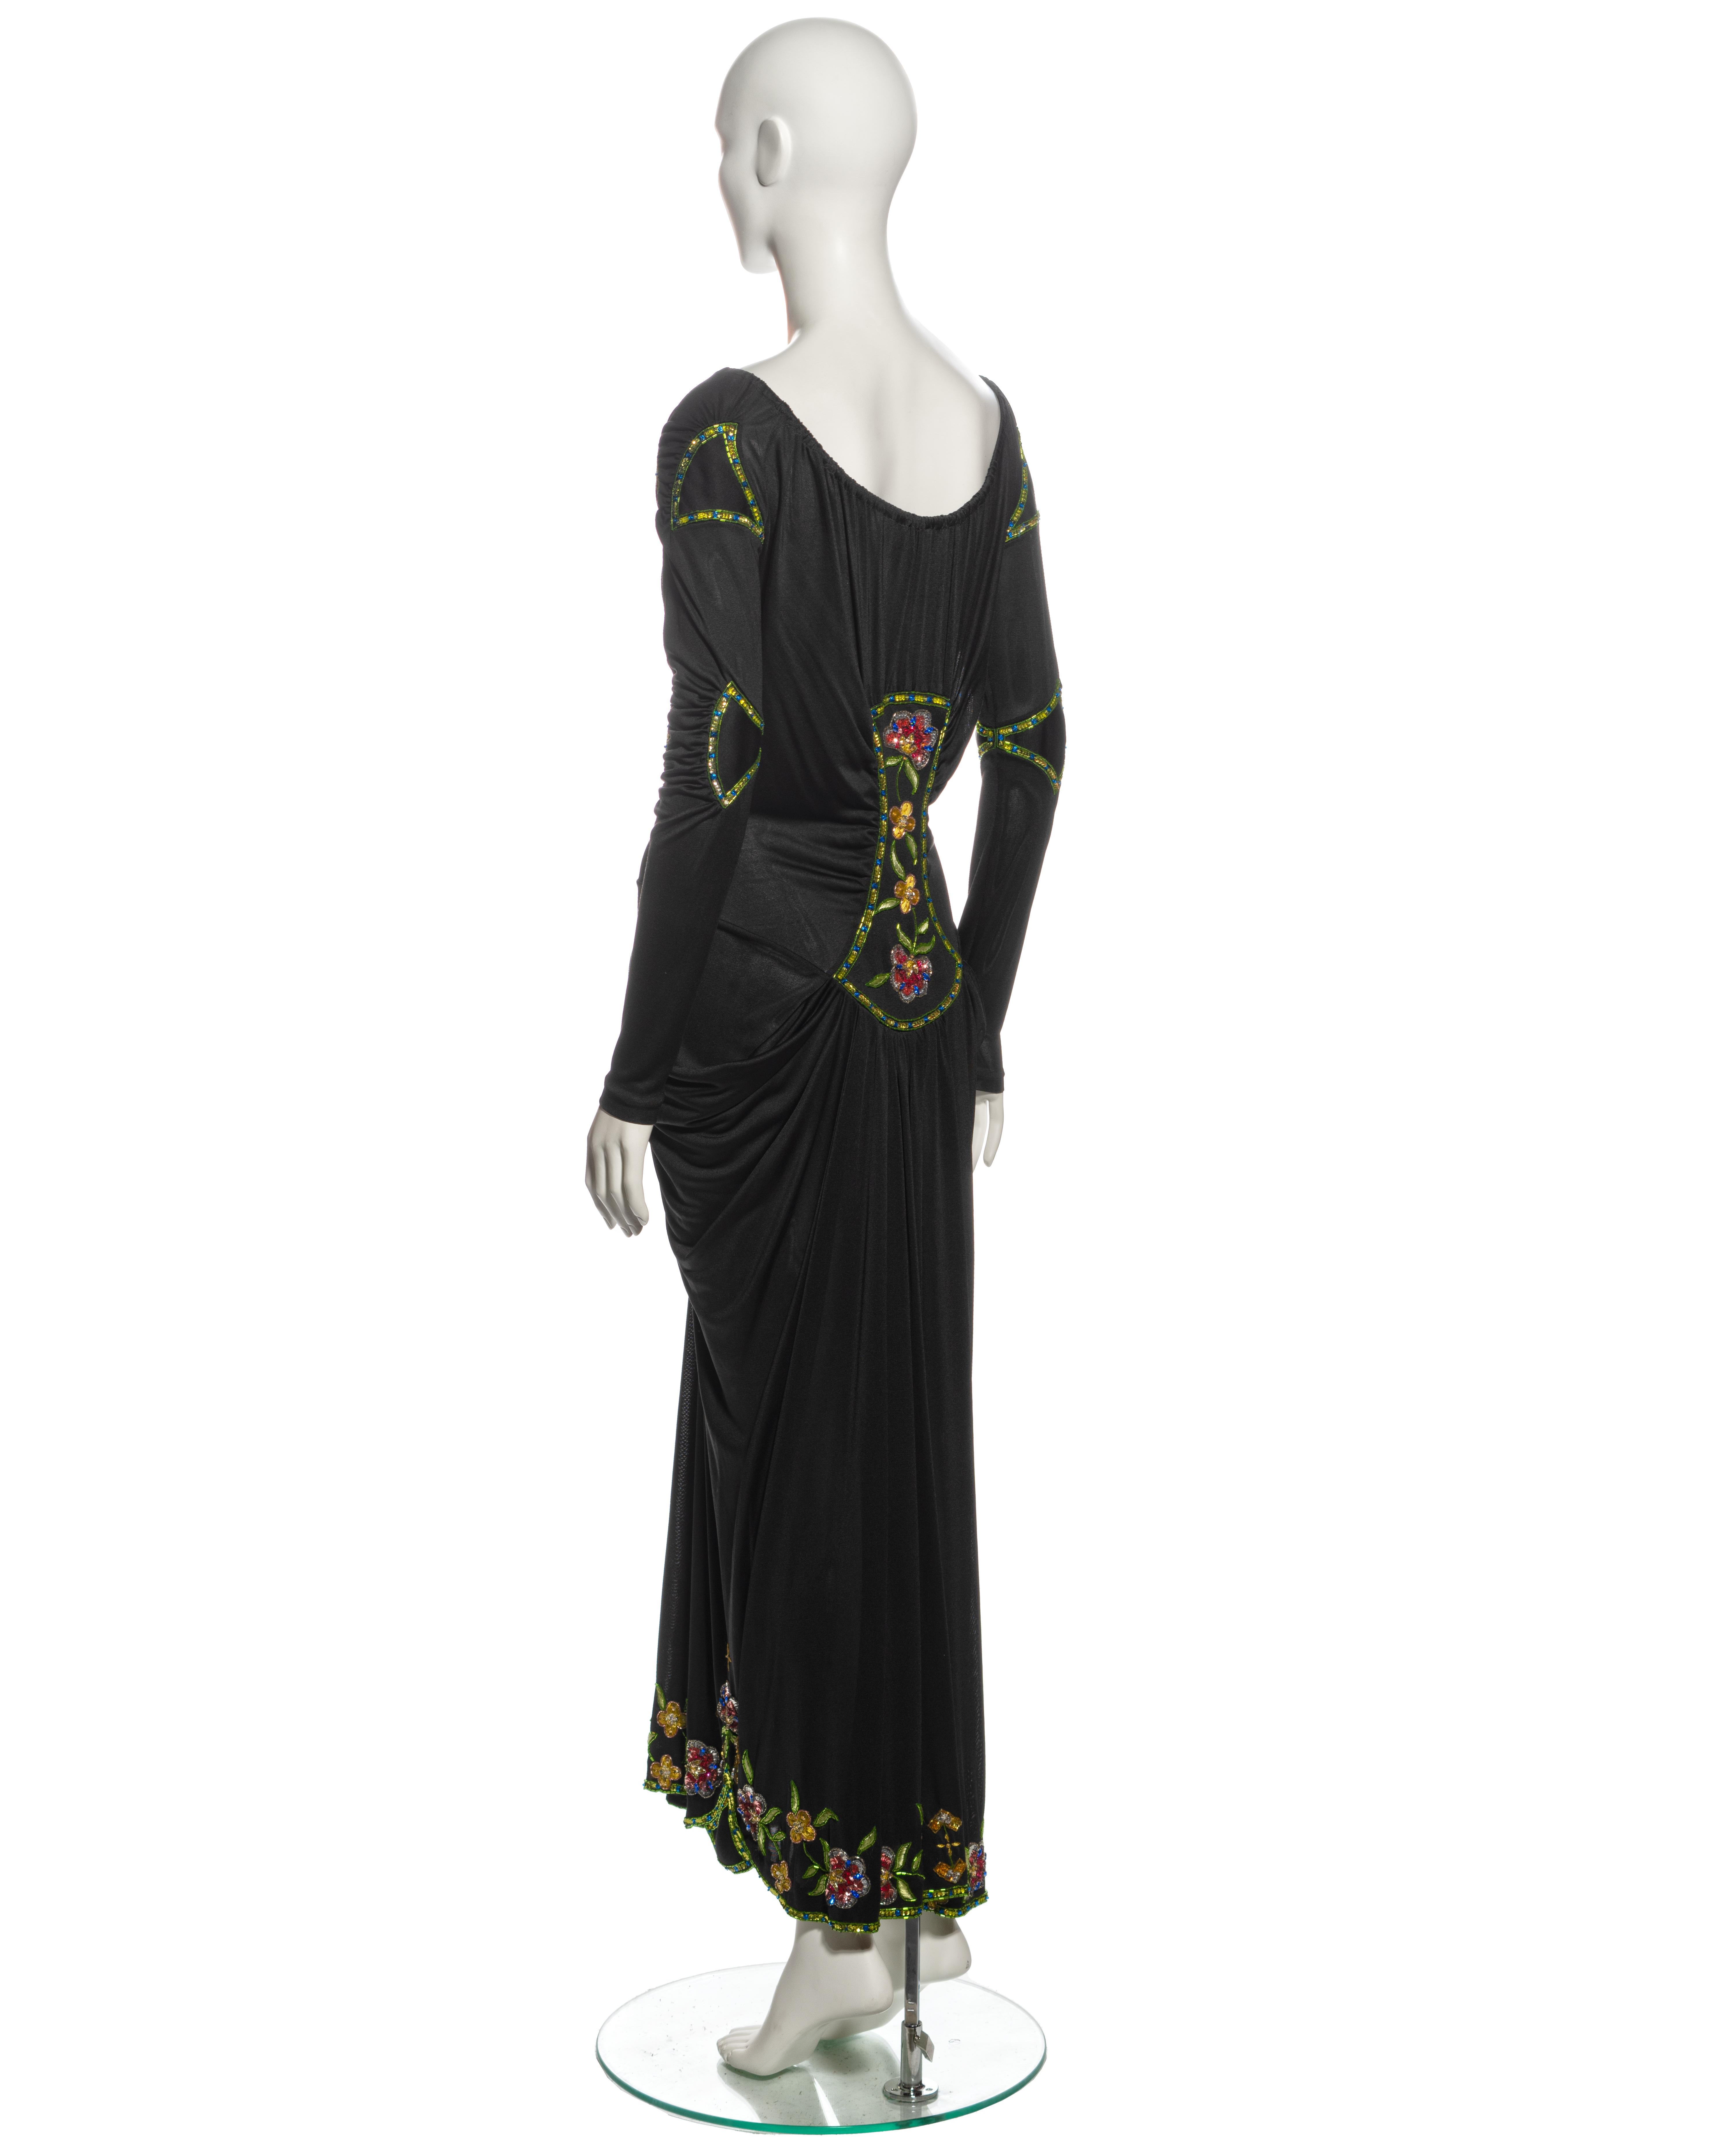 Christian Dior by John Galliano Black Viscose Embellished Draped Dress, ss 2002 For Sale 11